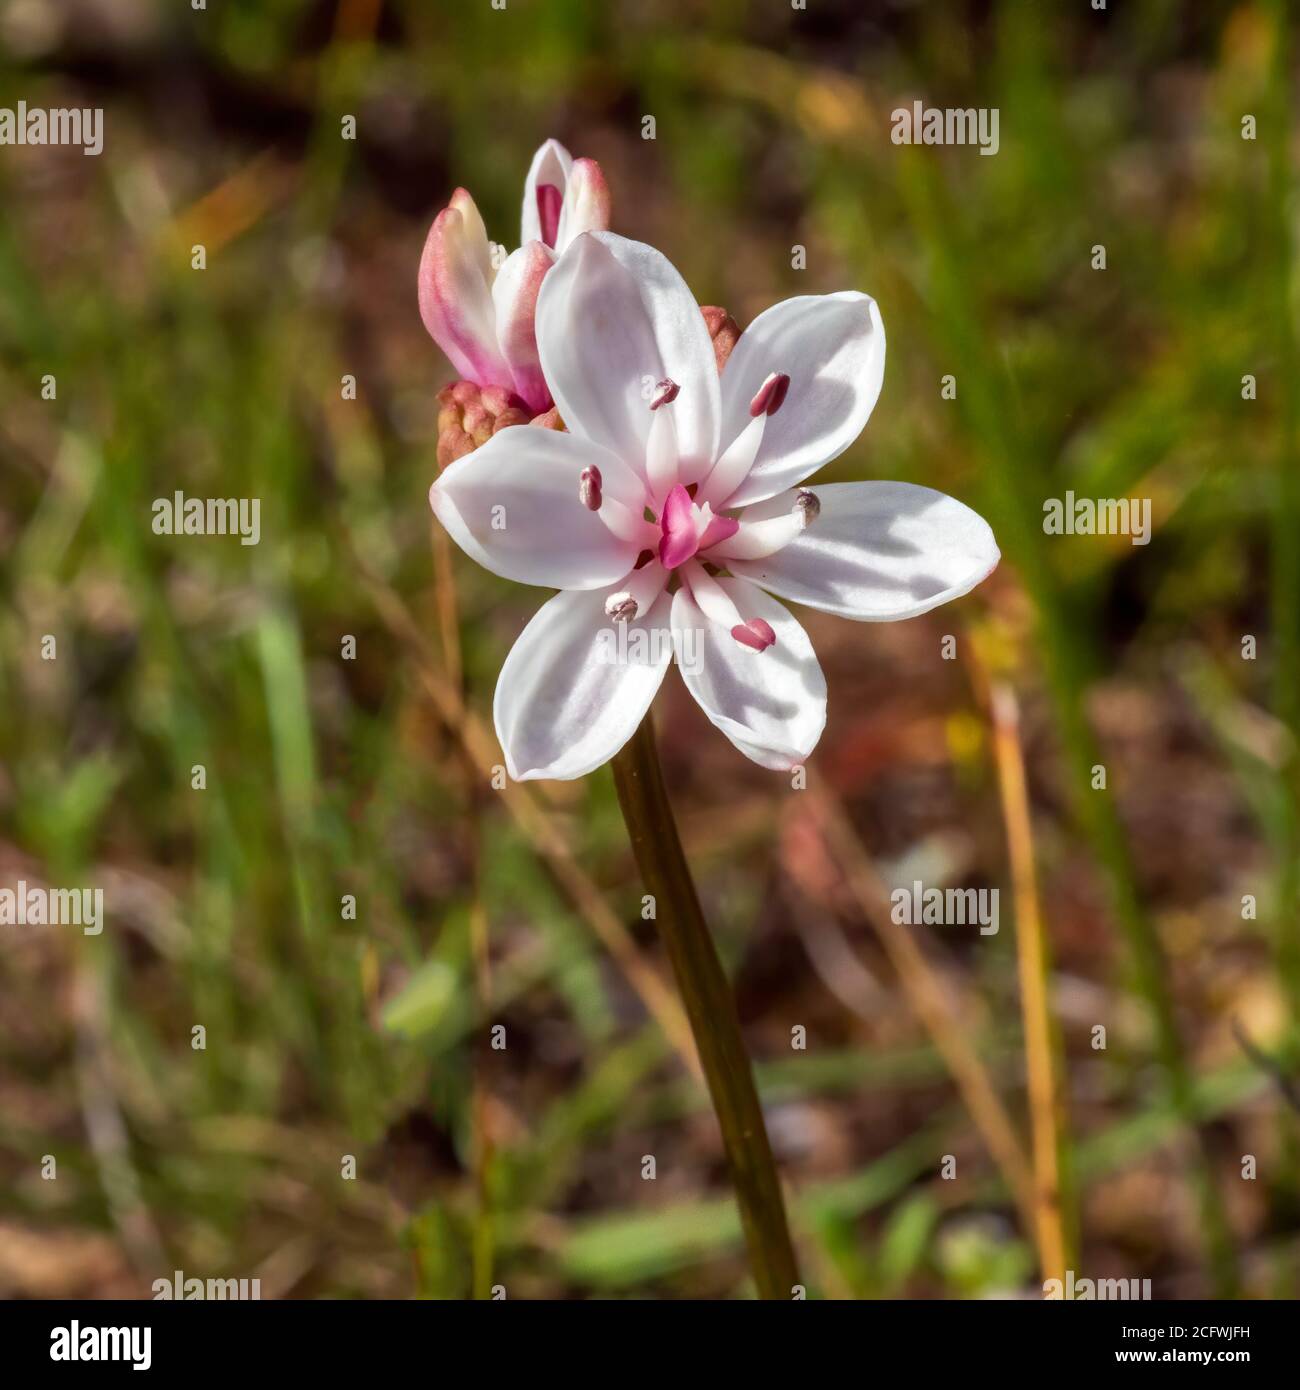 The Milk maids (Burchadia umbellata) flowers are held on a slender stalk. The white flowers have 6 petals with a pinkish centre. Stock Photo